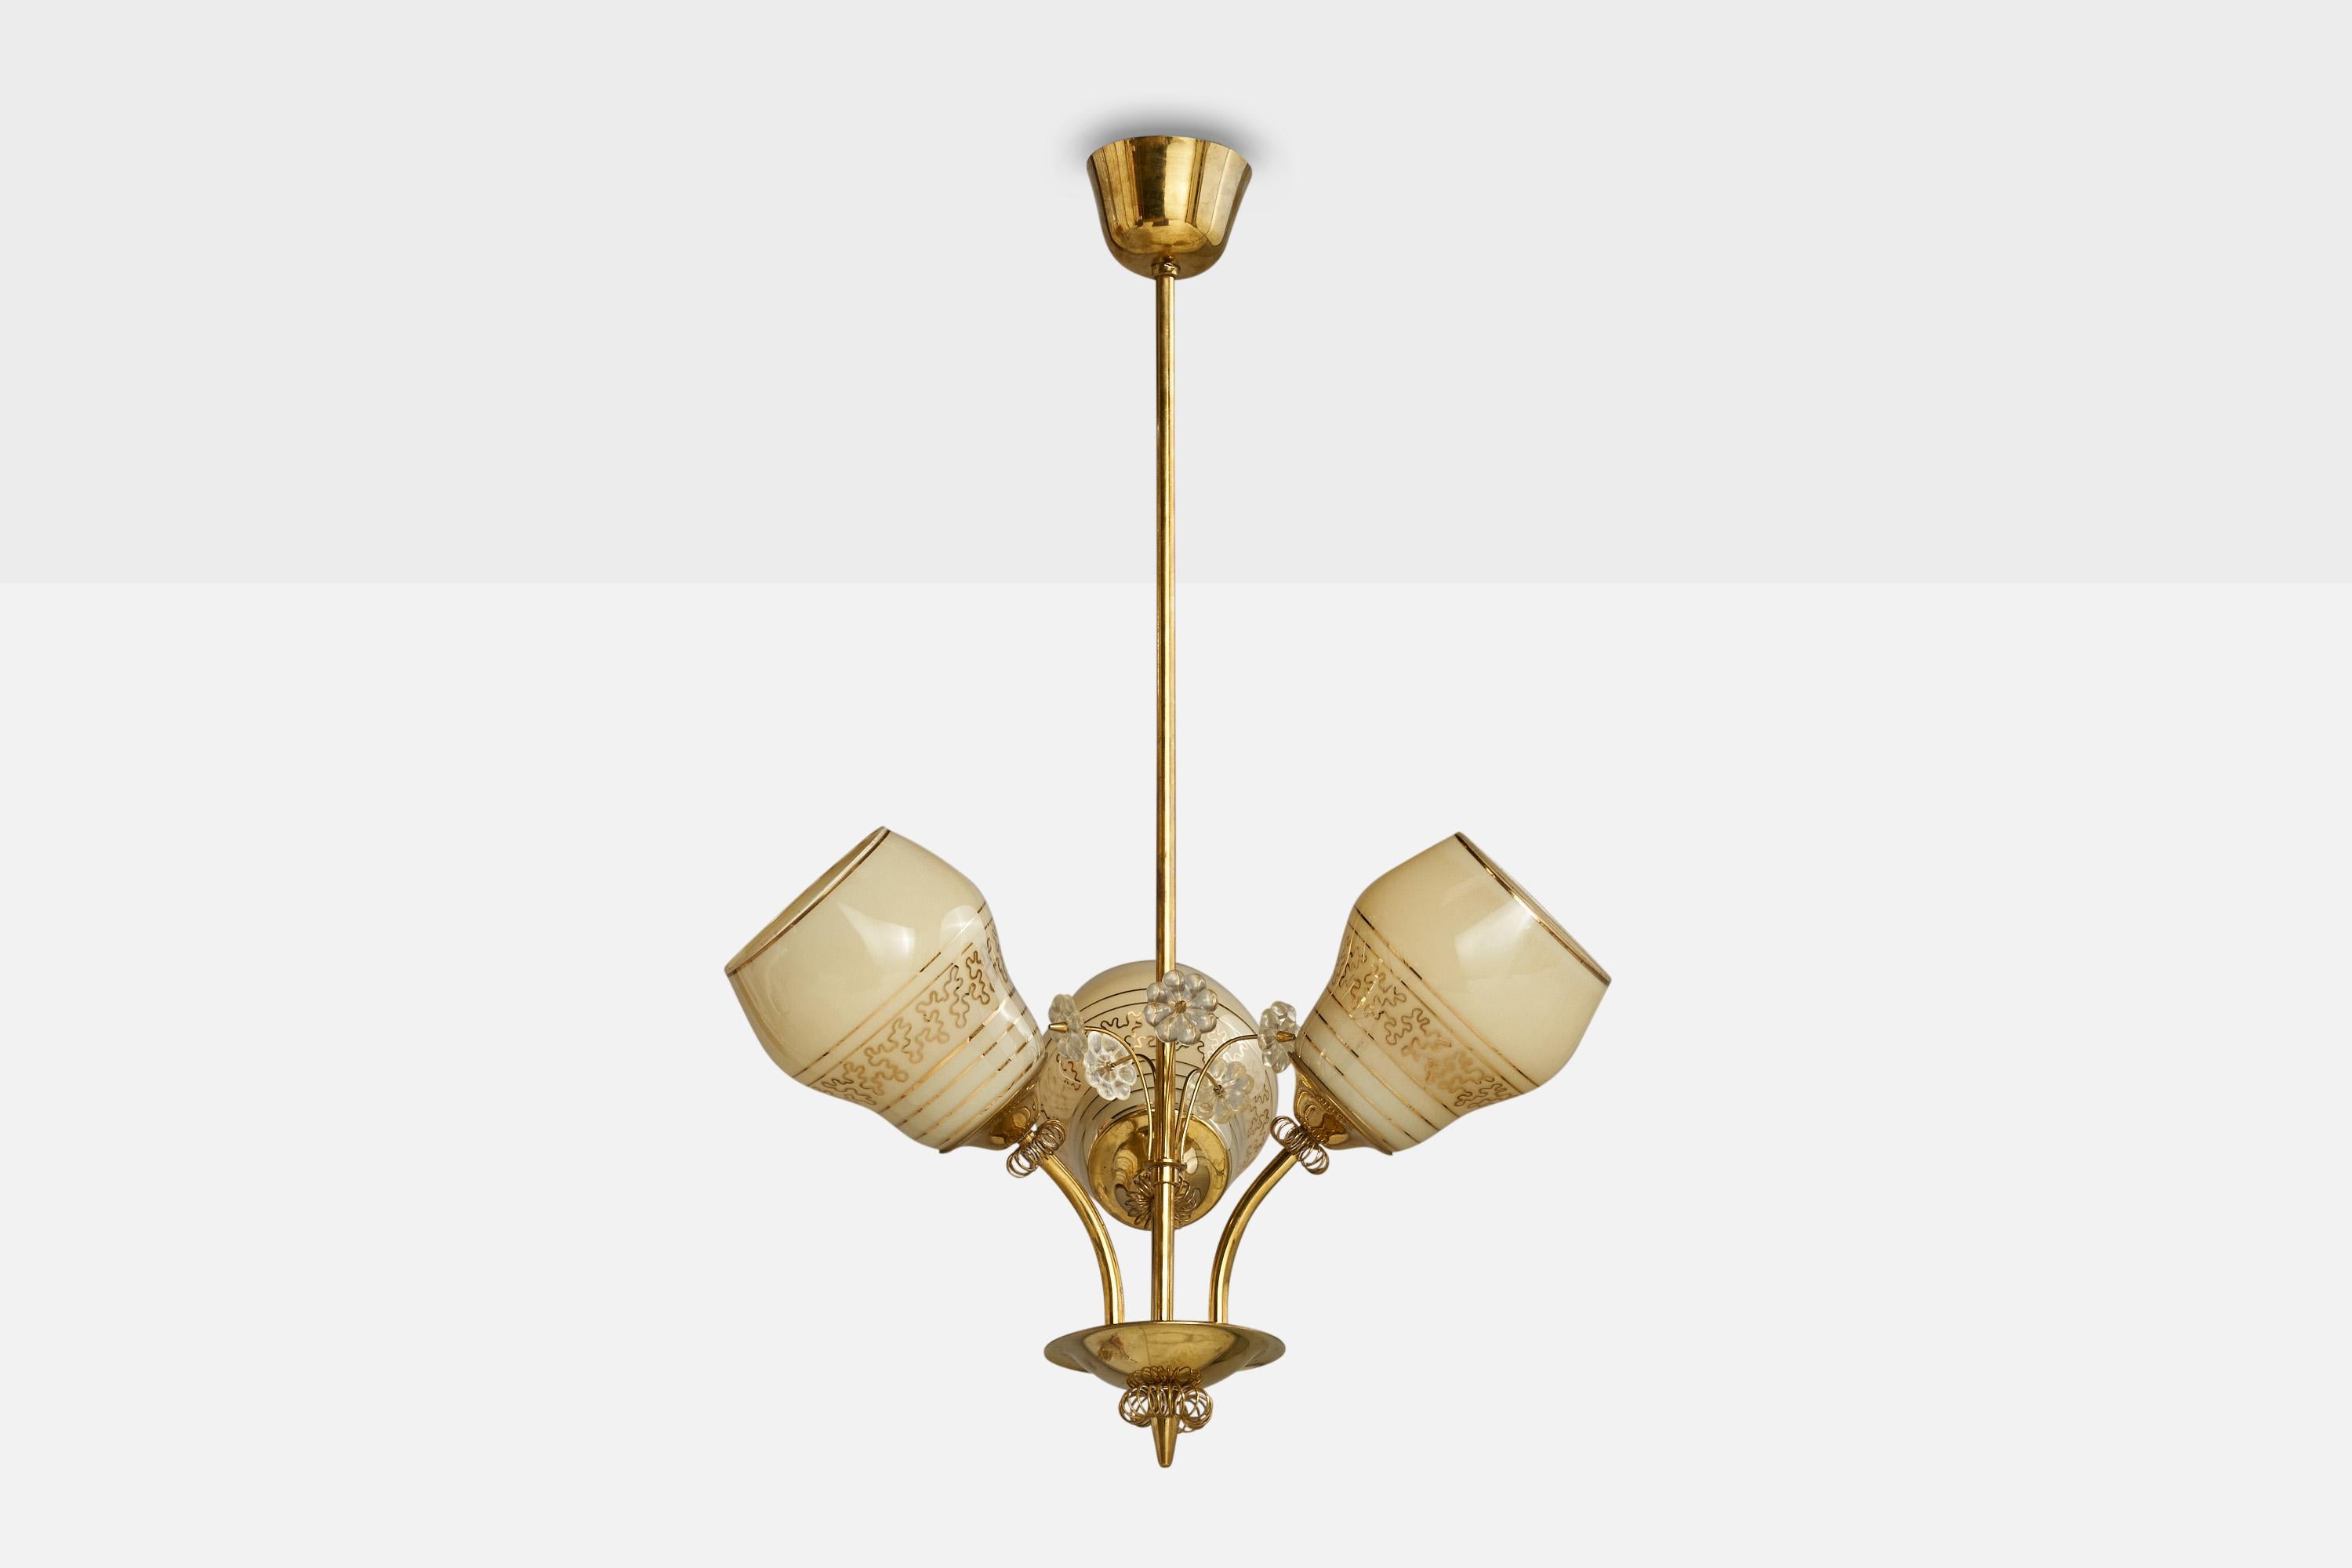 A brass, glass and beige opaline glass chandelier designed and produced by ITSU, Finland, 1940s.

Dimensions of canopy (inches): 2”  H x 3.5”  Diameter
Socket takes standard E-26 bulbs. 3 sockets.There is no maximum wattage stated on the fixture.